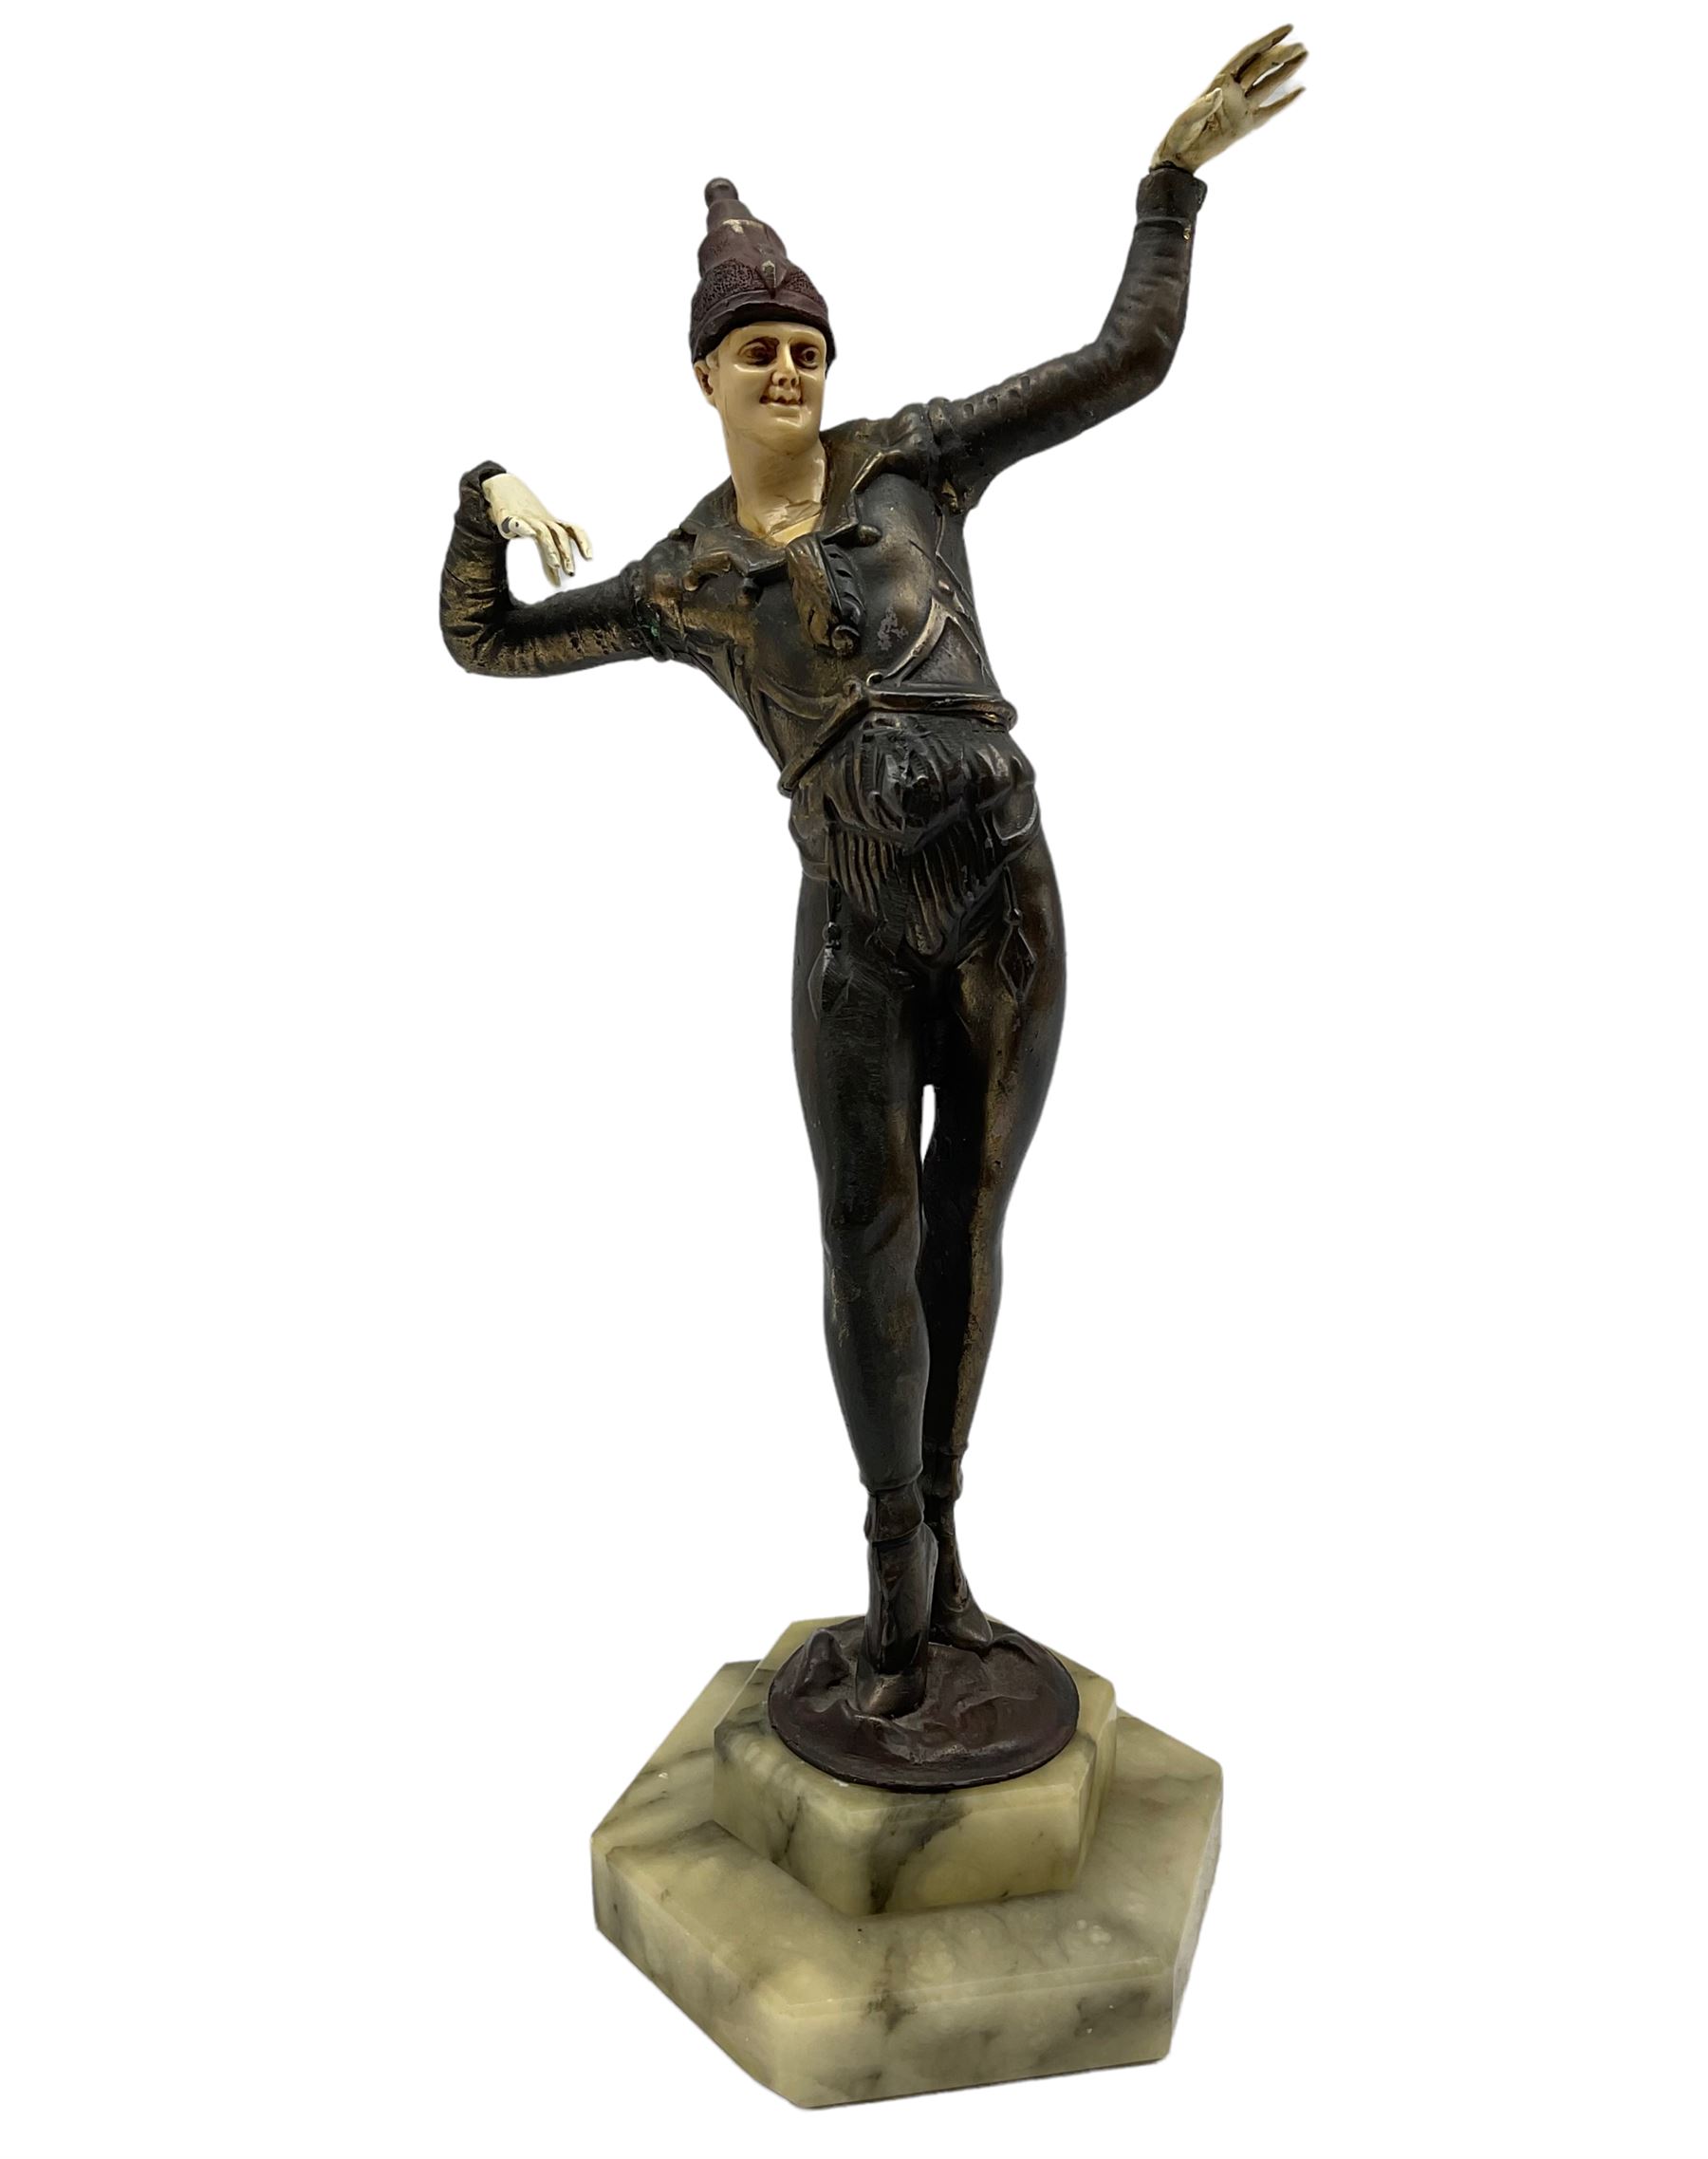 Art Deco style bronzed figure of a clown mounted on an onyx plinth